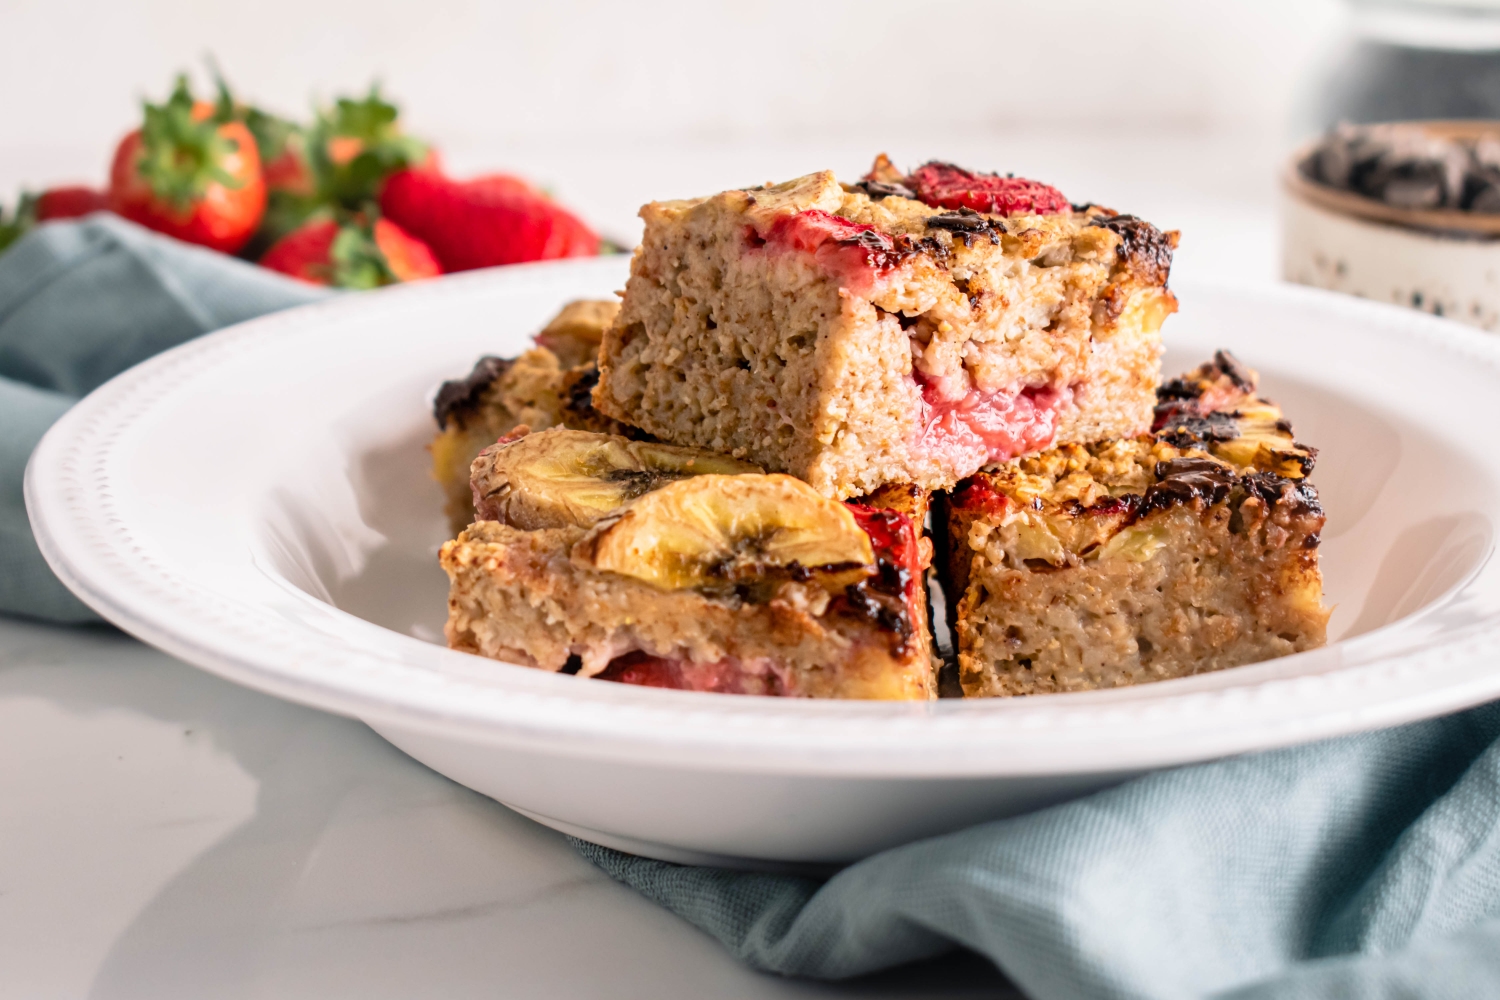 Strawberry baked oatmeal with banana and chocolate chips cut into squares and placed on a white plate.